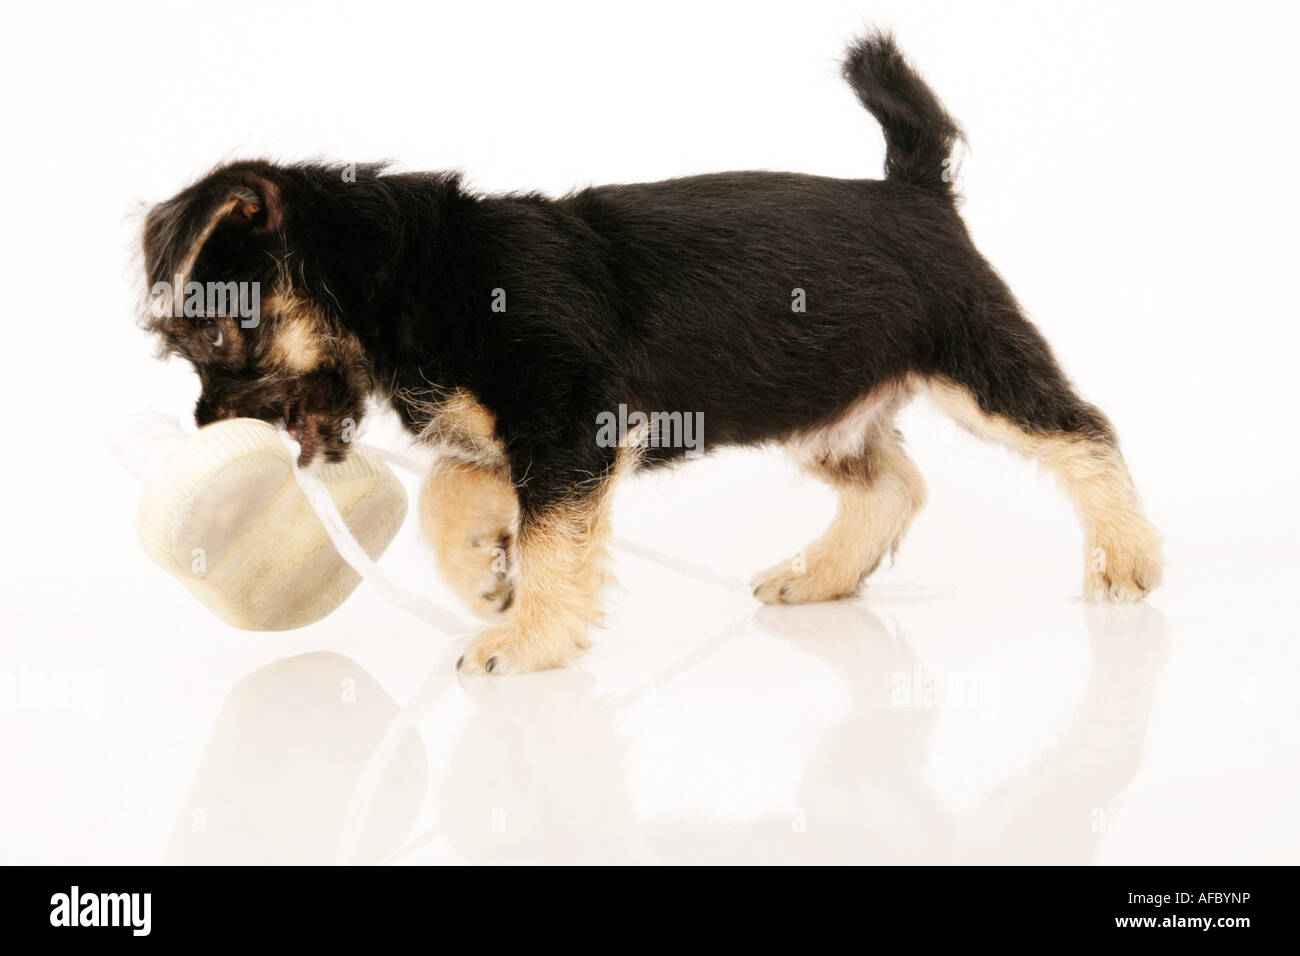 Puppy isolated on white Stock Photo